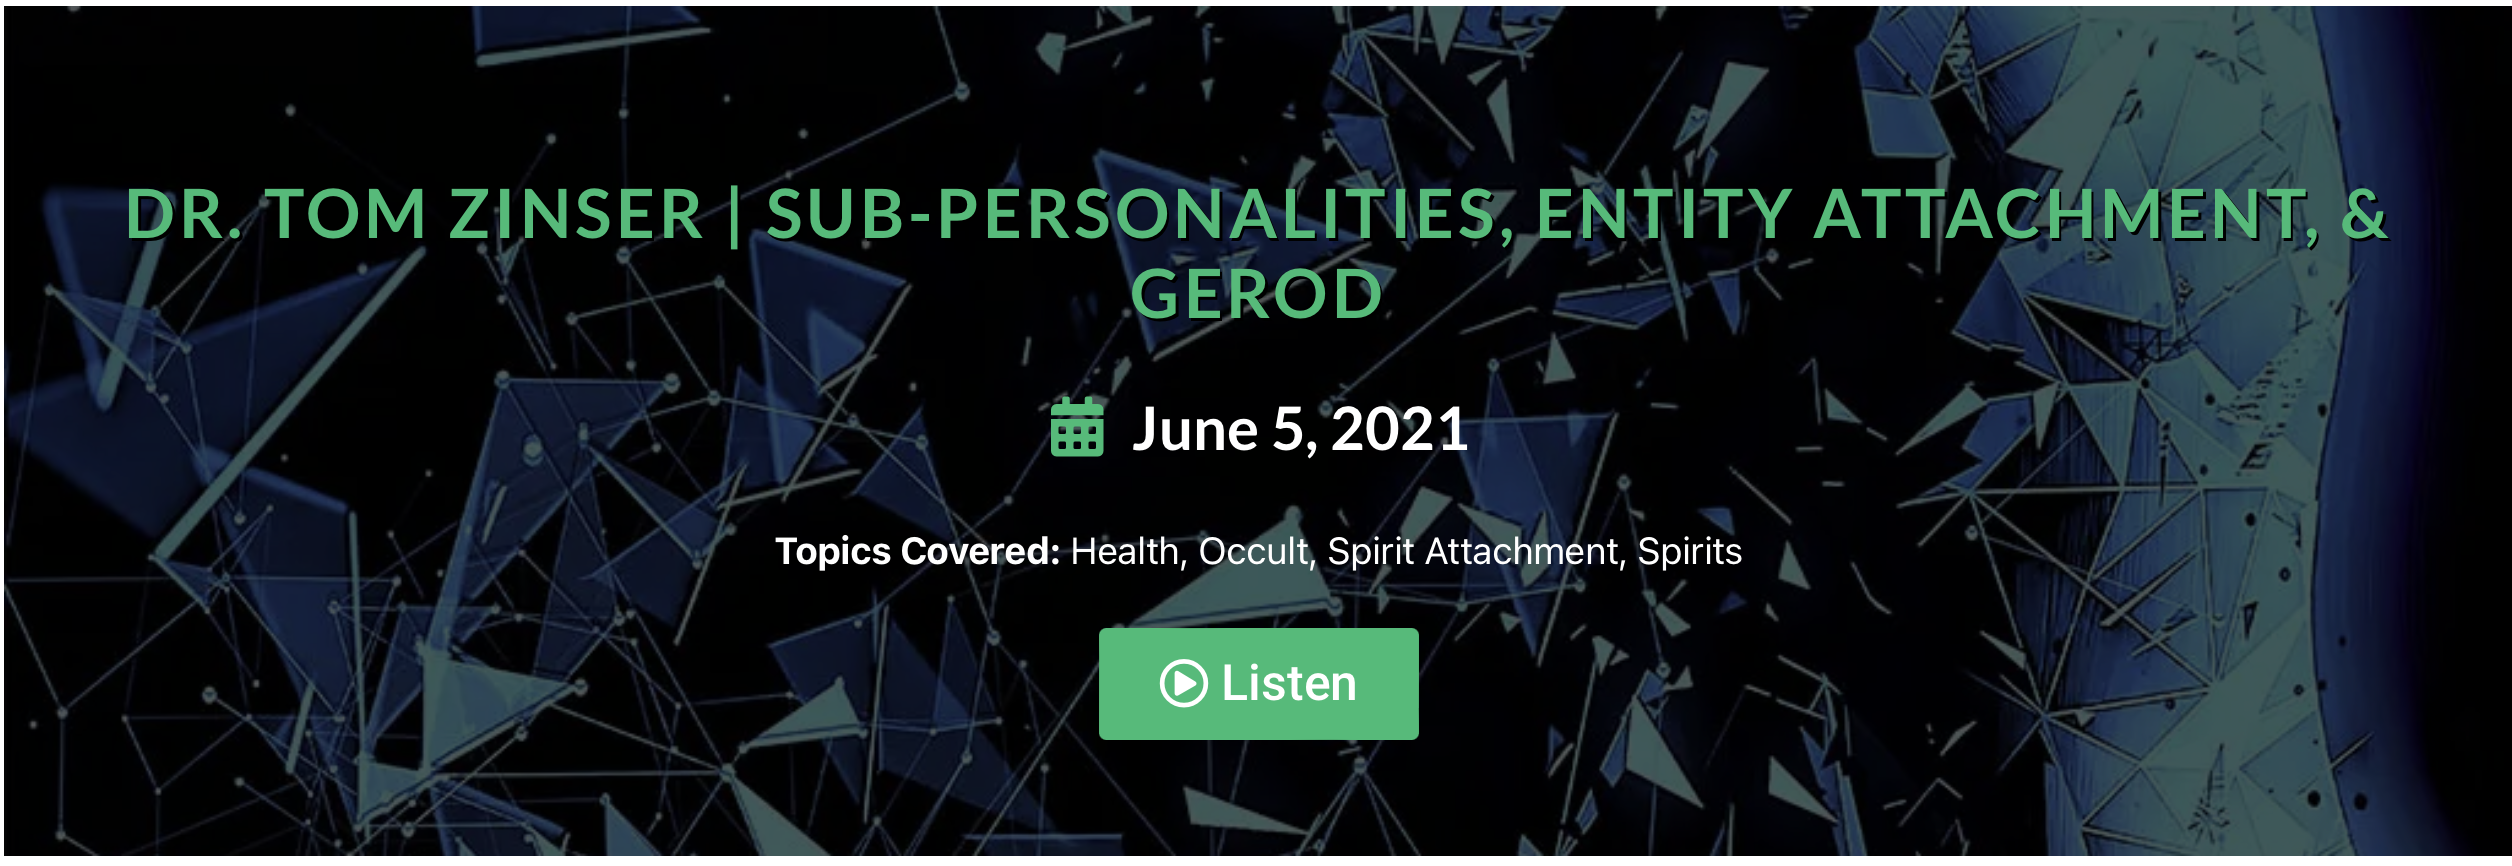 Cover frame of a podcast episode with Dr. Zinser around sub-personalities, entity attachment, and Gerod